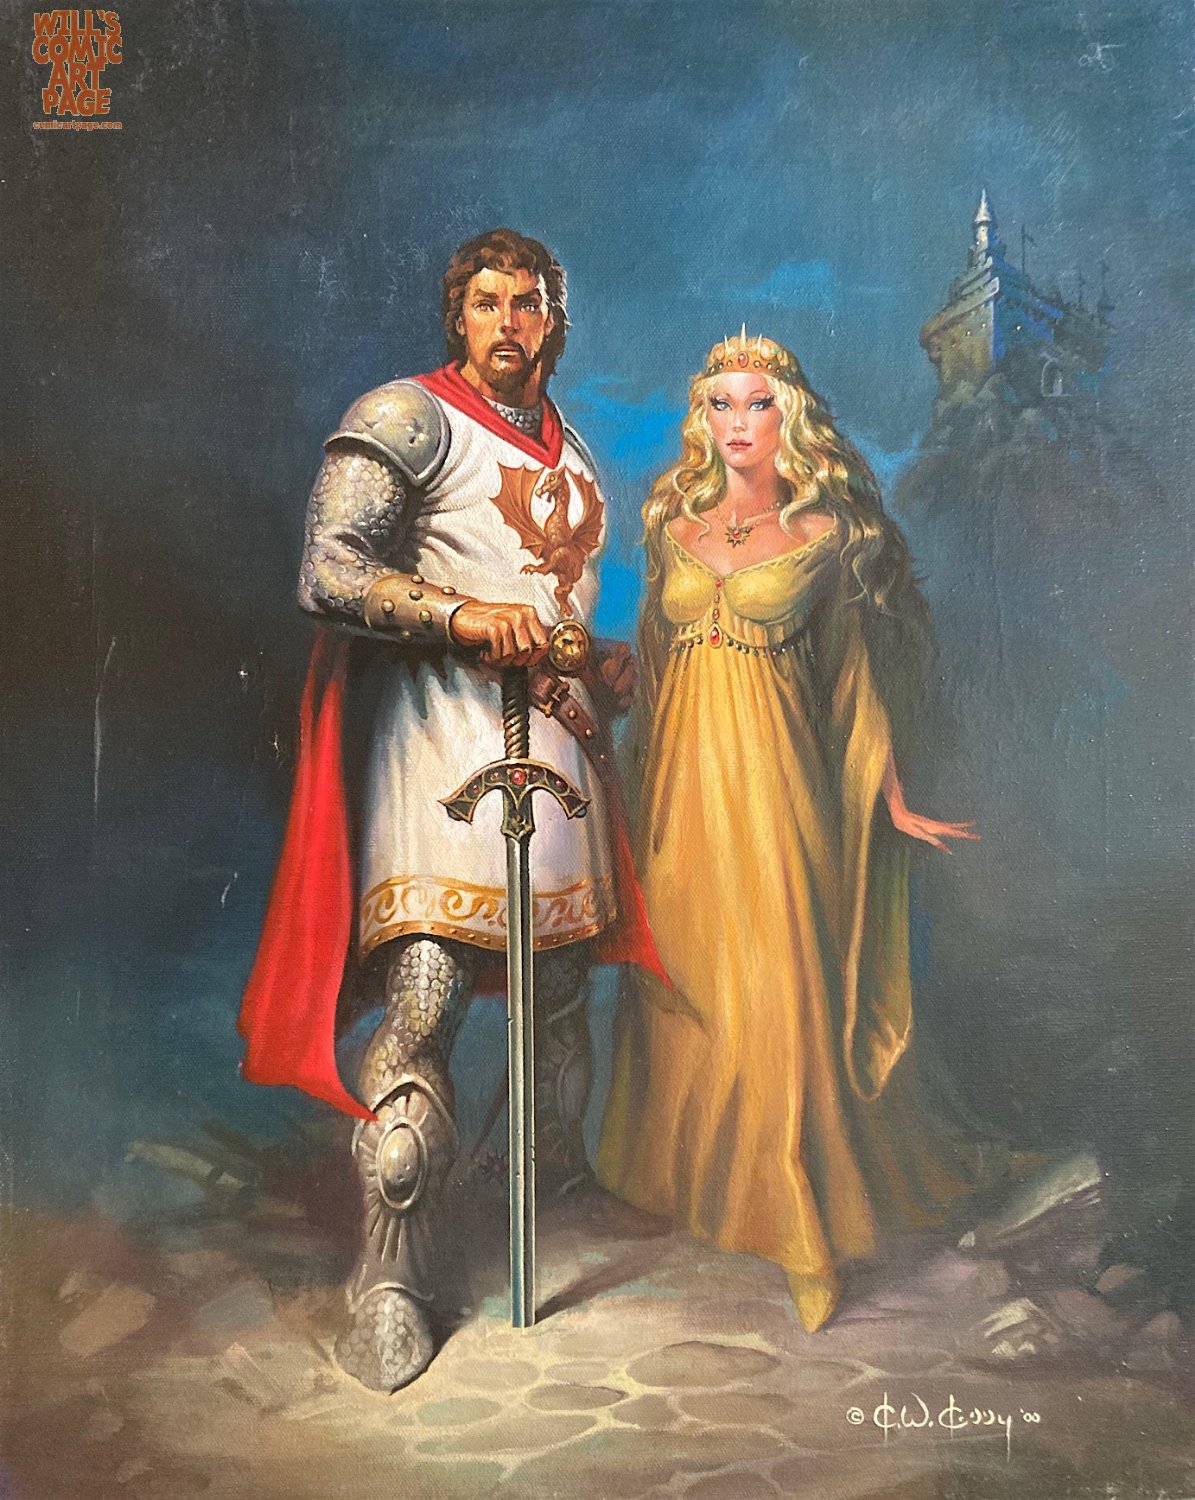 King Arthur & Lady Guinevere (2000) with Excalibur! for | Nerd Crawler